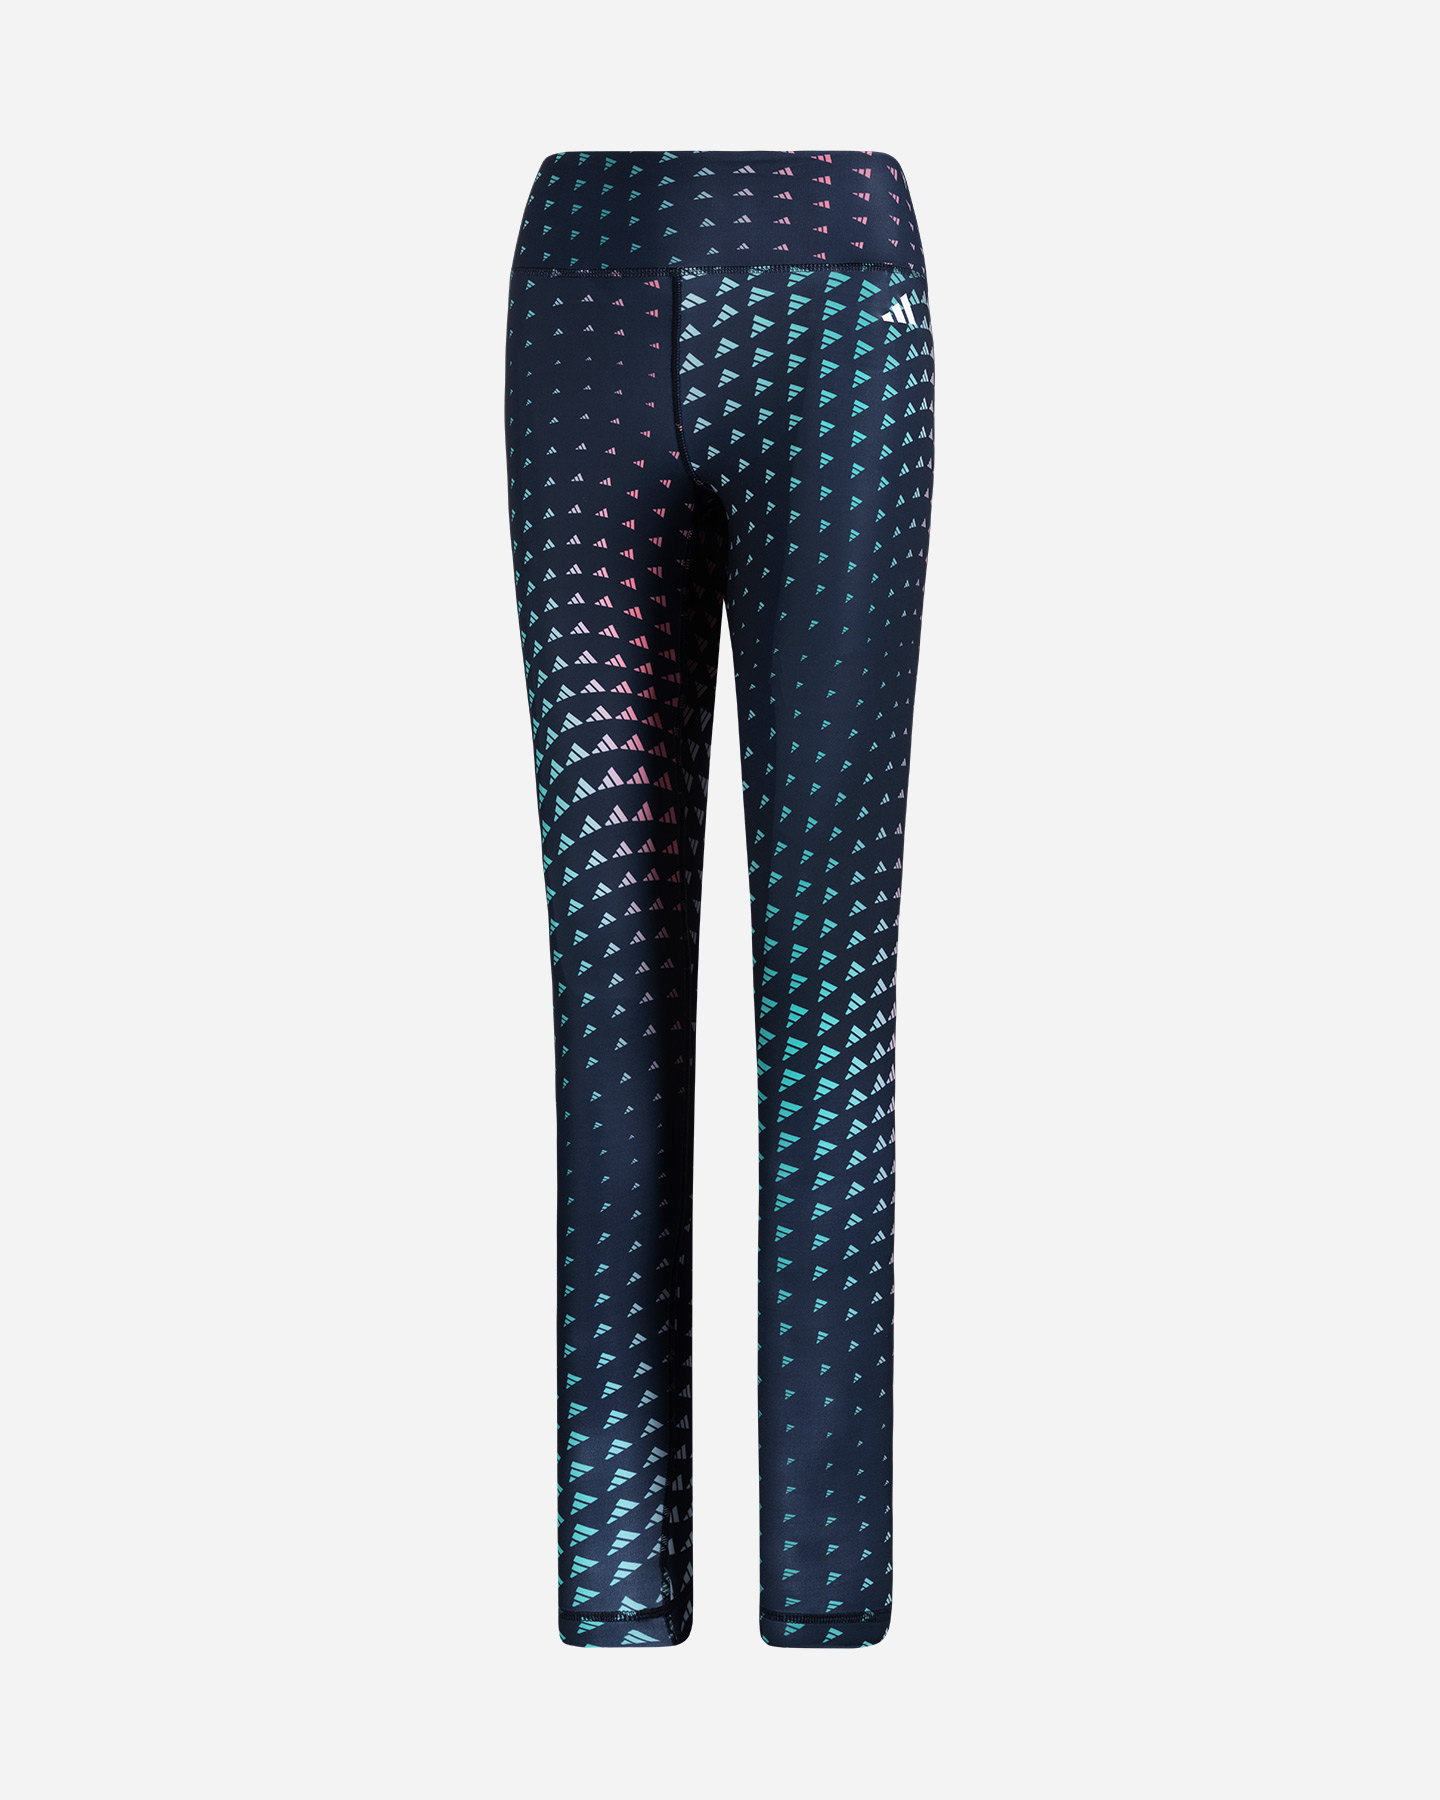 Image of Adidas All Over Loghi W - Leggings - Donna